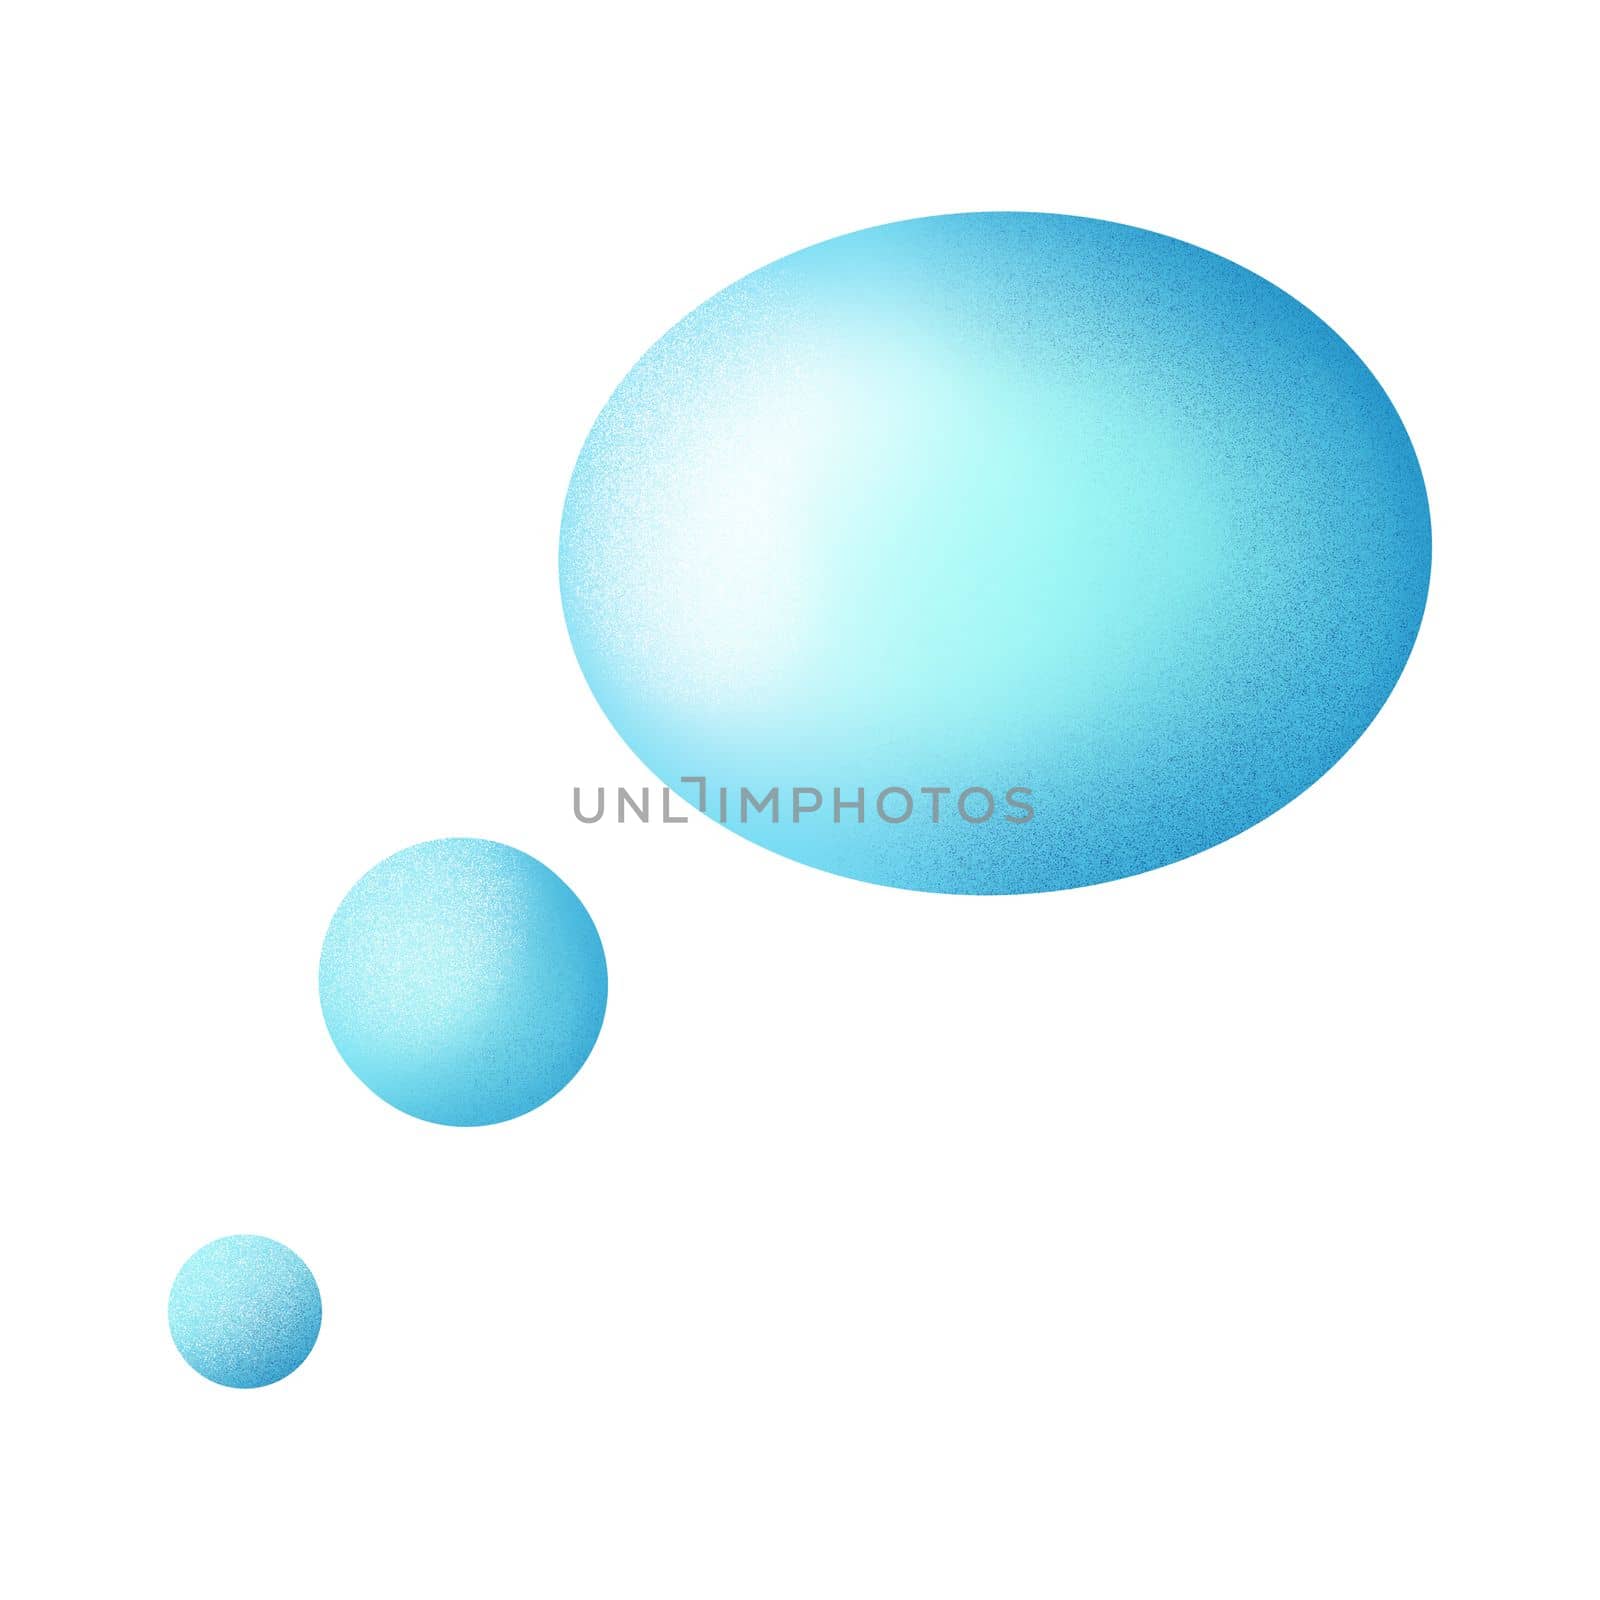 Cartoon illustration of blue colored thought bubble placed on white isolated background